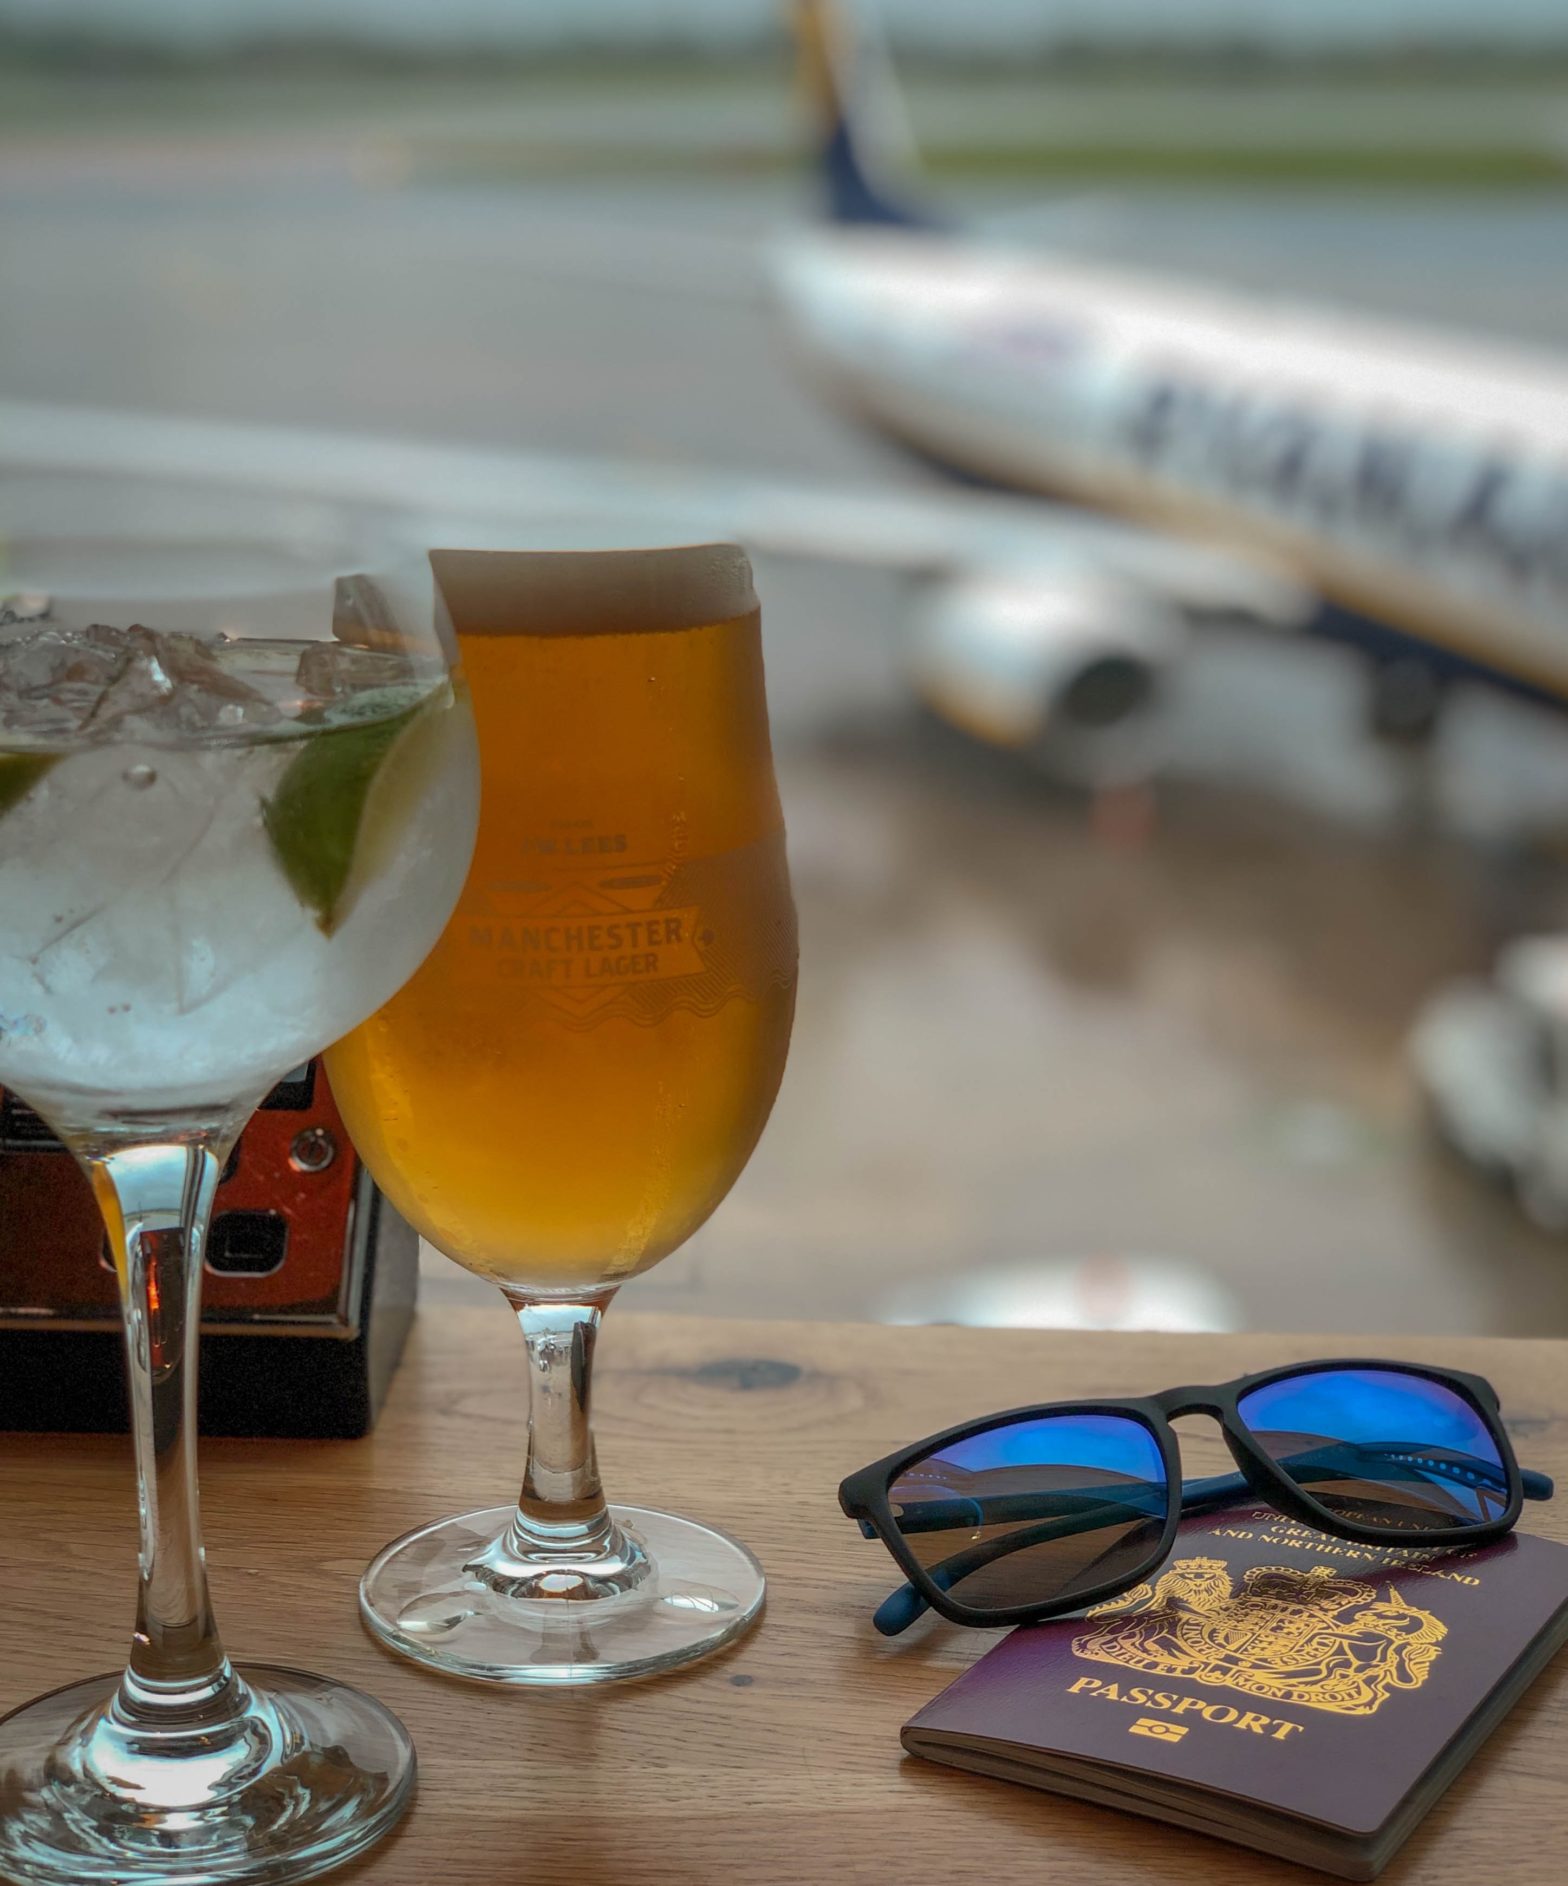 Inflight Safety: Should Airlines Limit Alcohol Orders?